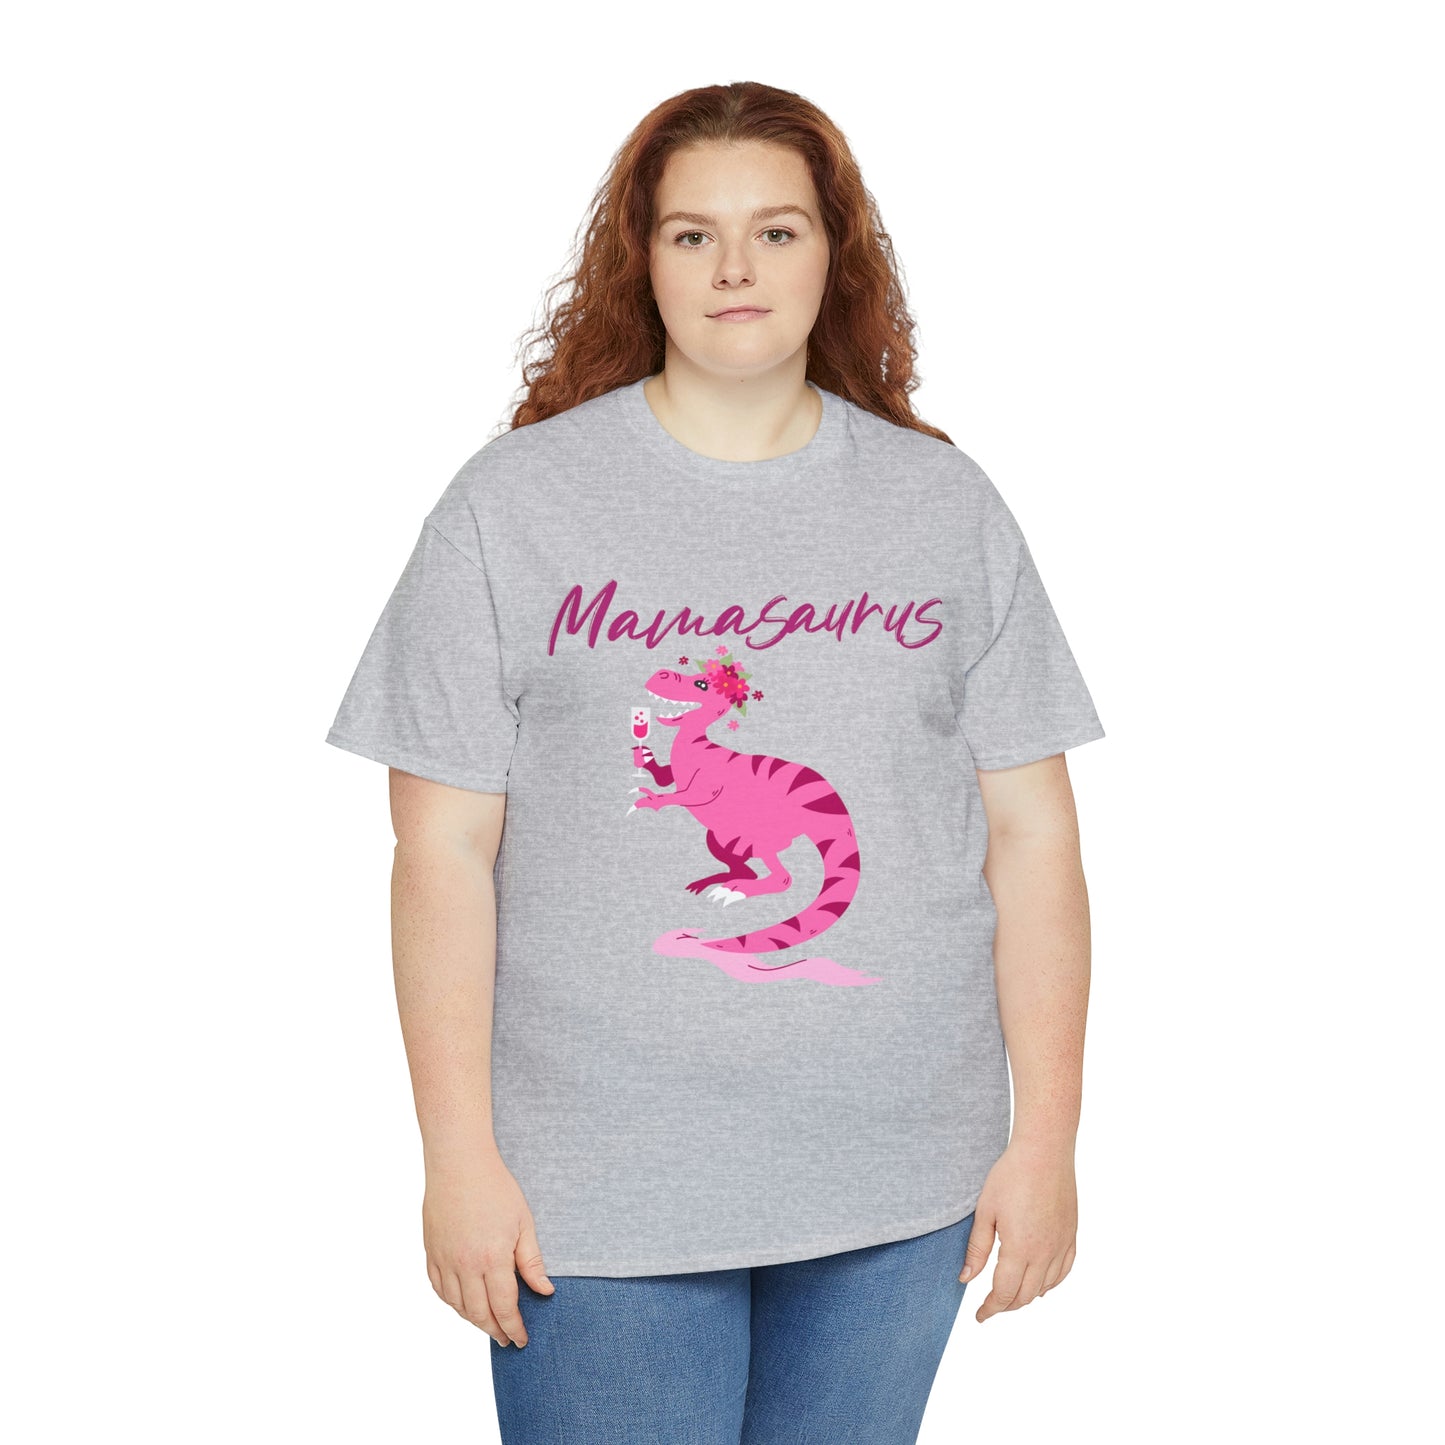 Mock up of plus-size woman wearing the Sports Grey T-shirt